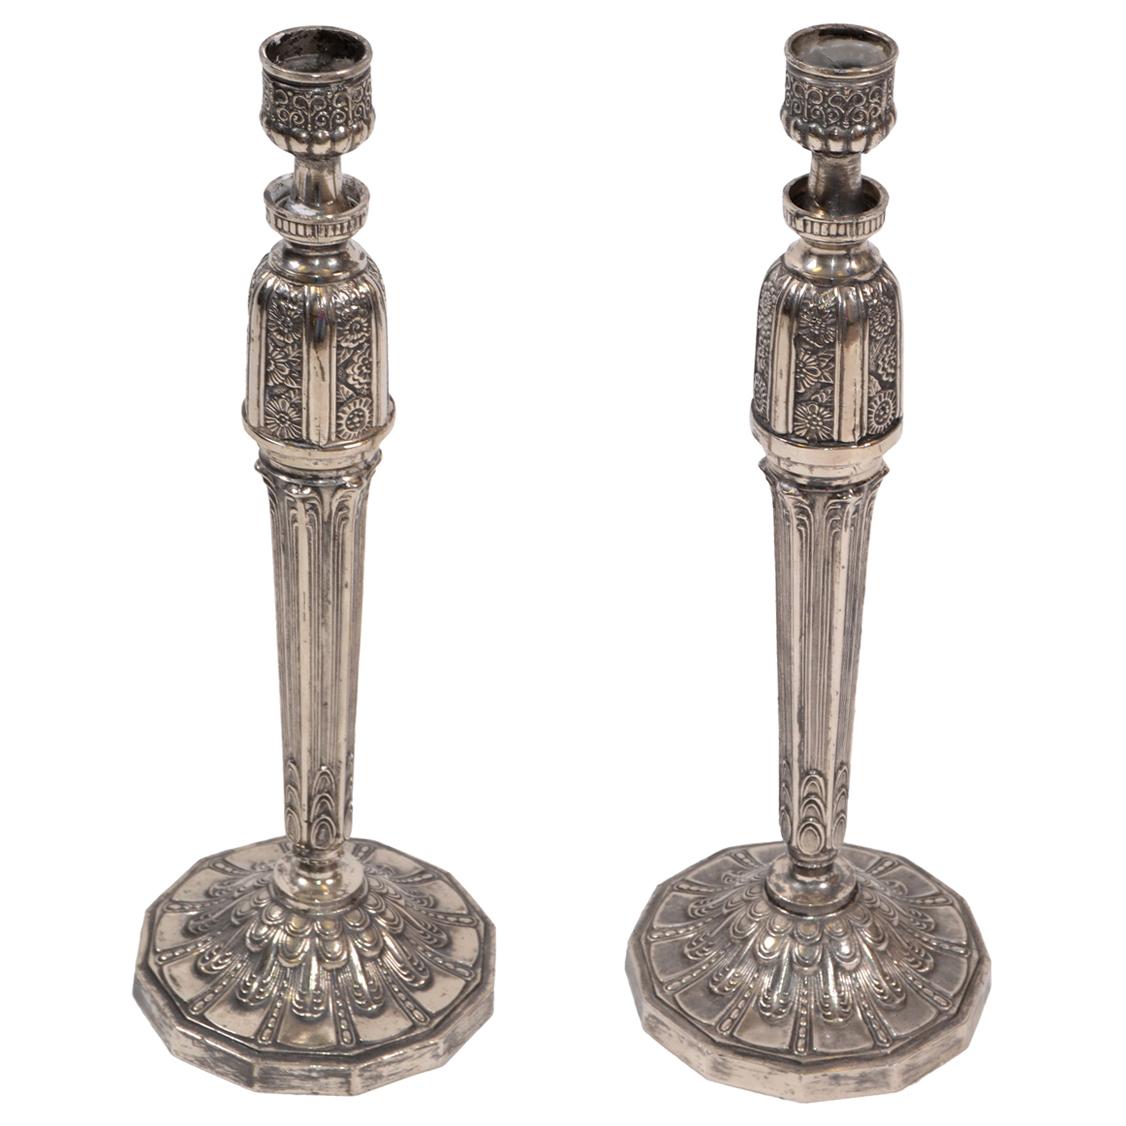 George III Silver Plated Heavy Candelabras, Candleholders, Candlesticks, Pair